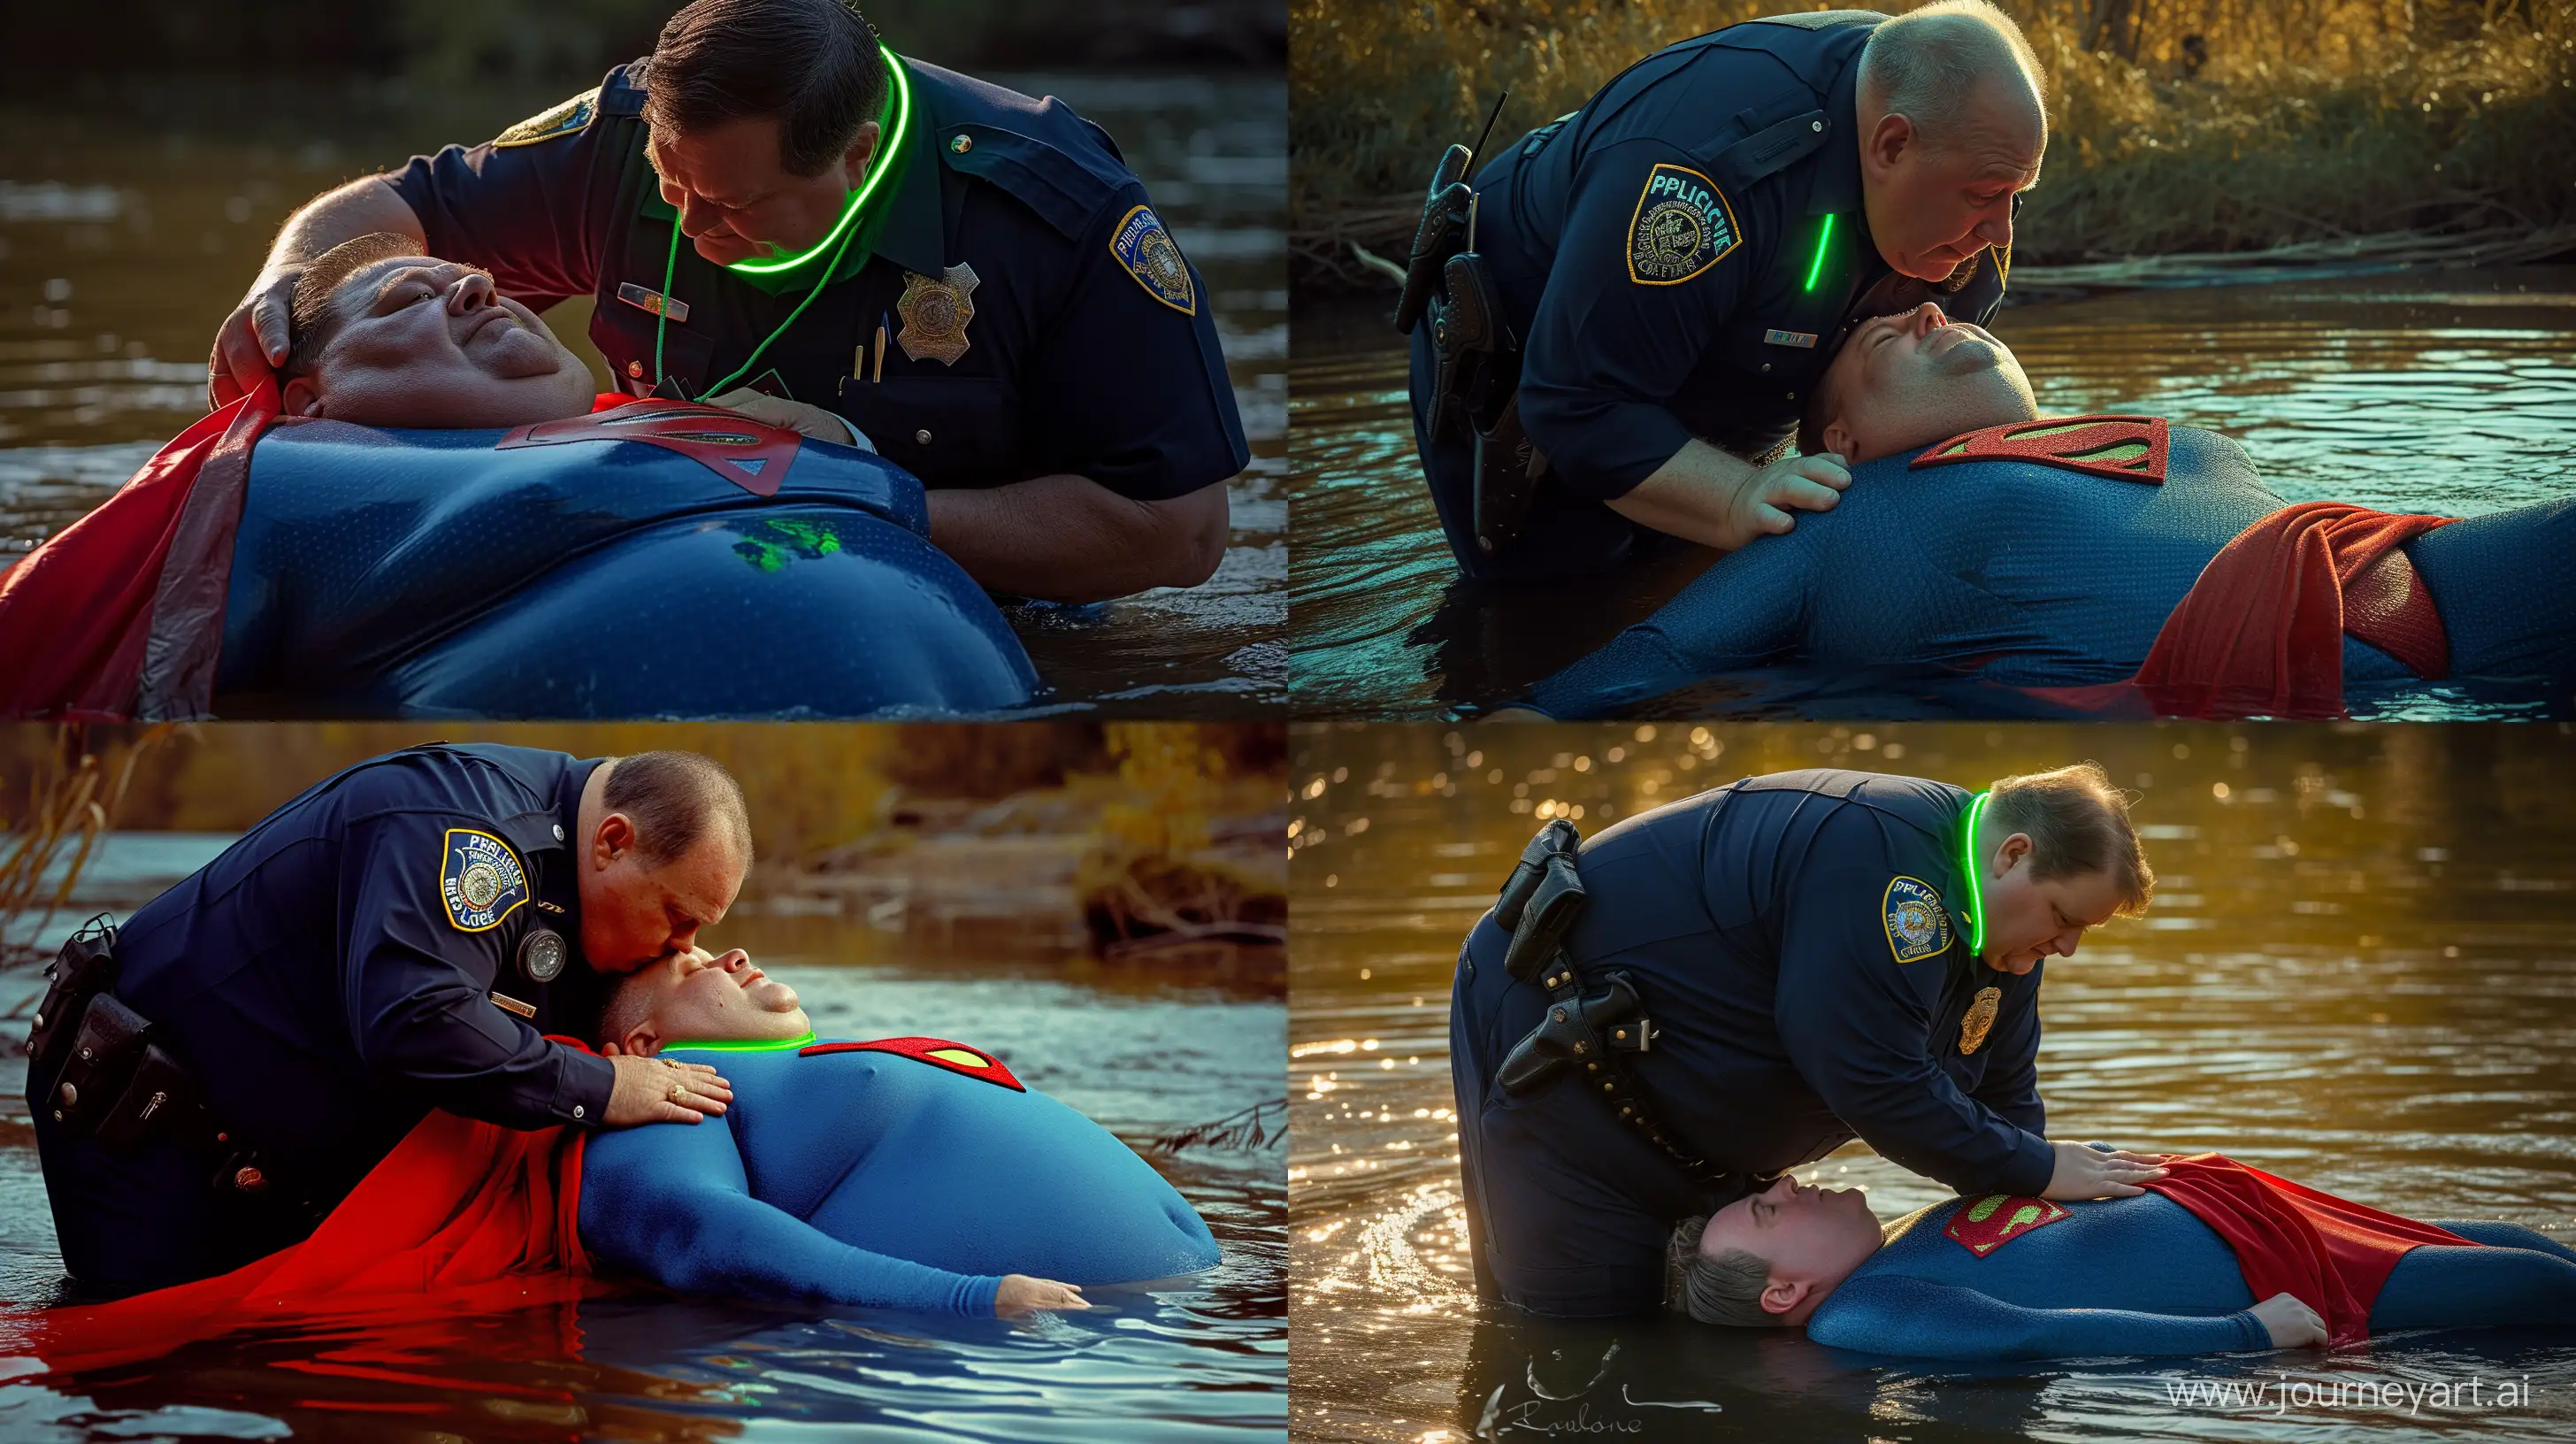 Close-up photo of a fat man aged 60 wearing a navy police uniform. Bending behind and tightening a tight green glowing neon dog collar on the nape of a fat man aged 60 wearing a tight blue 1978 smooth superman costume with a red cape lying in the water. Natural Light. River. --style raw --ar 16:9